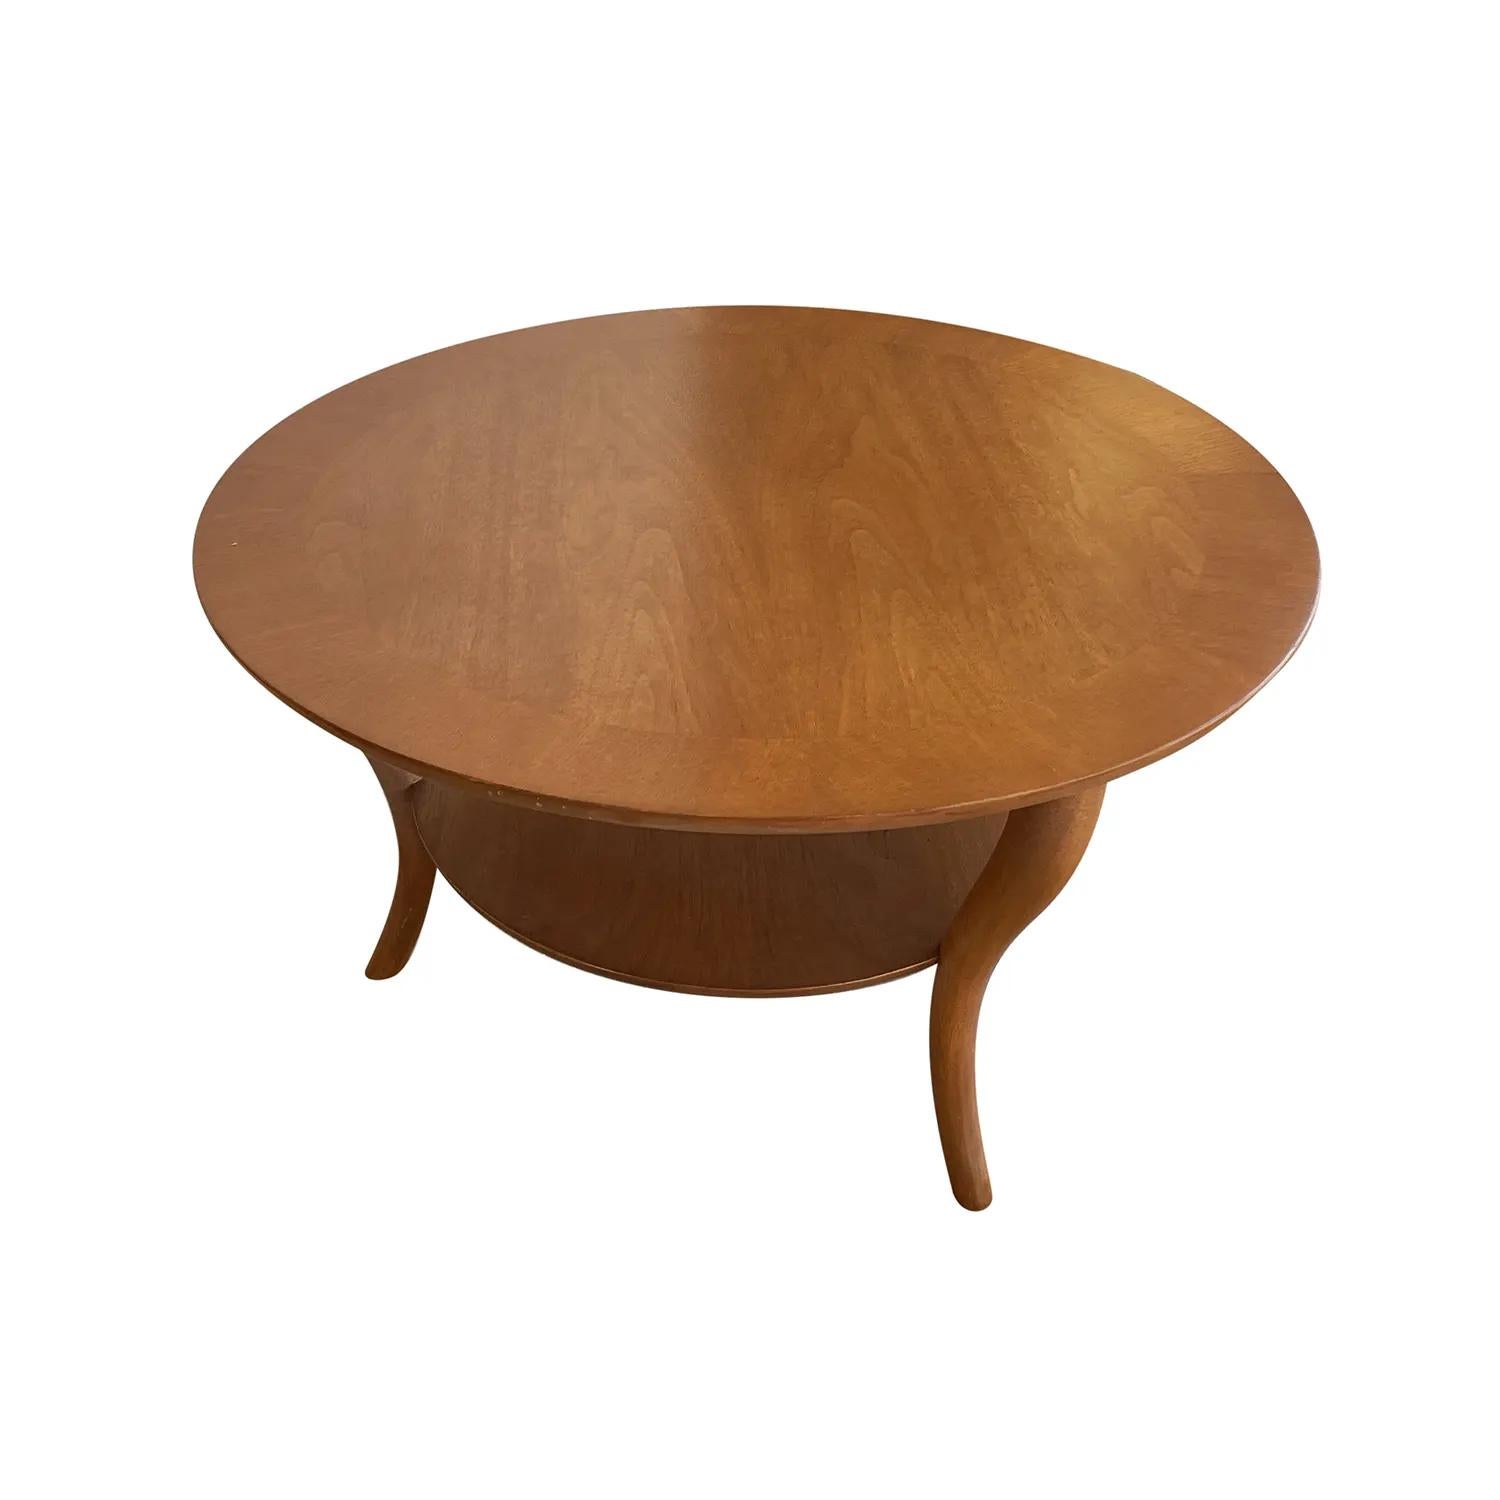 20th Century American Widdicomb Walnut Cocktail Table by T.H. Robsjohn-Gibbings For Sale 1